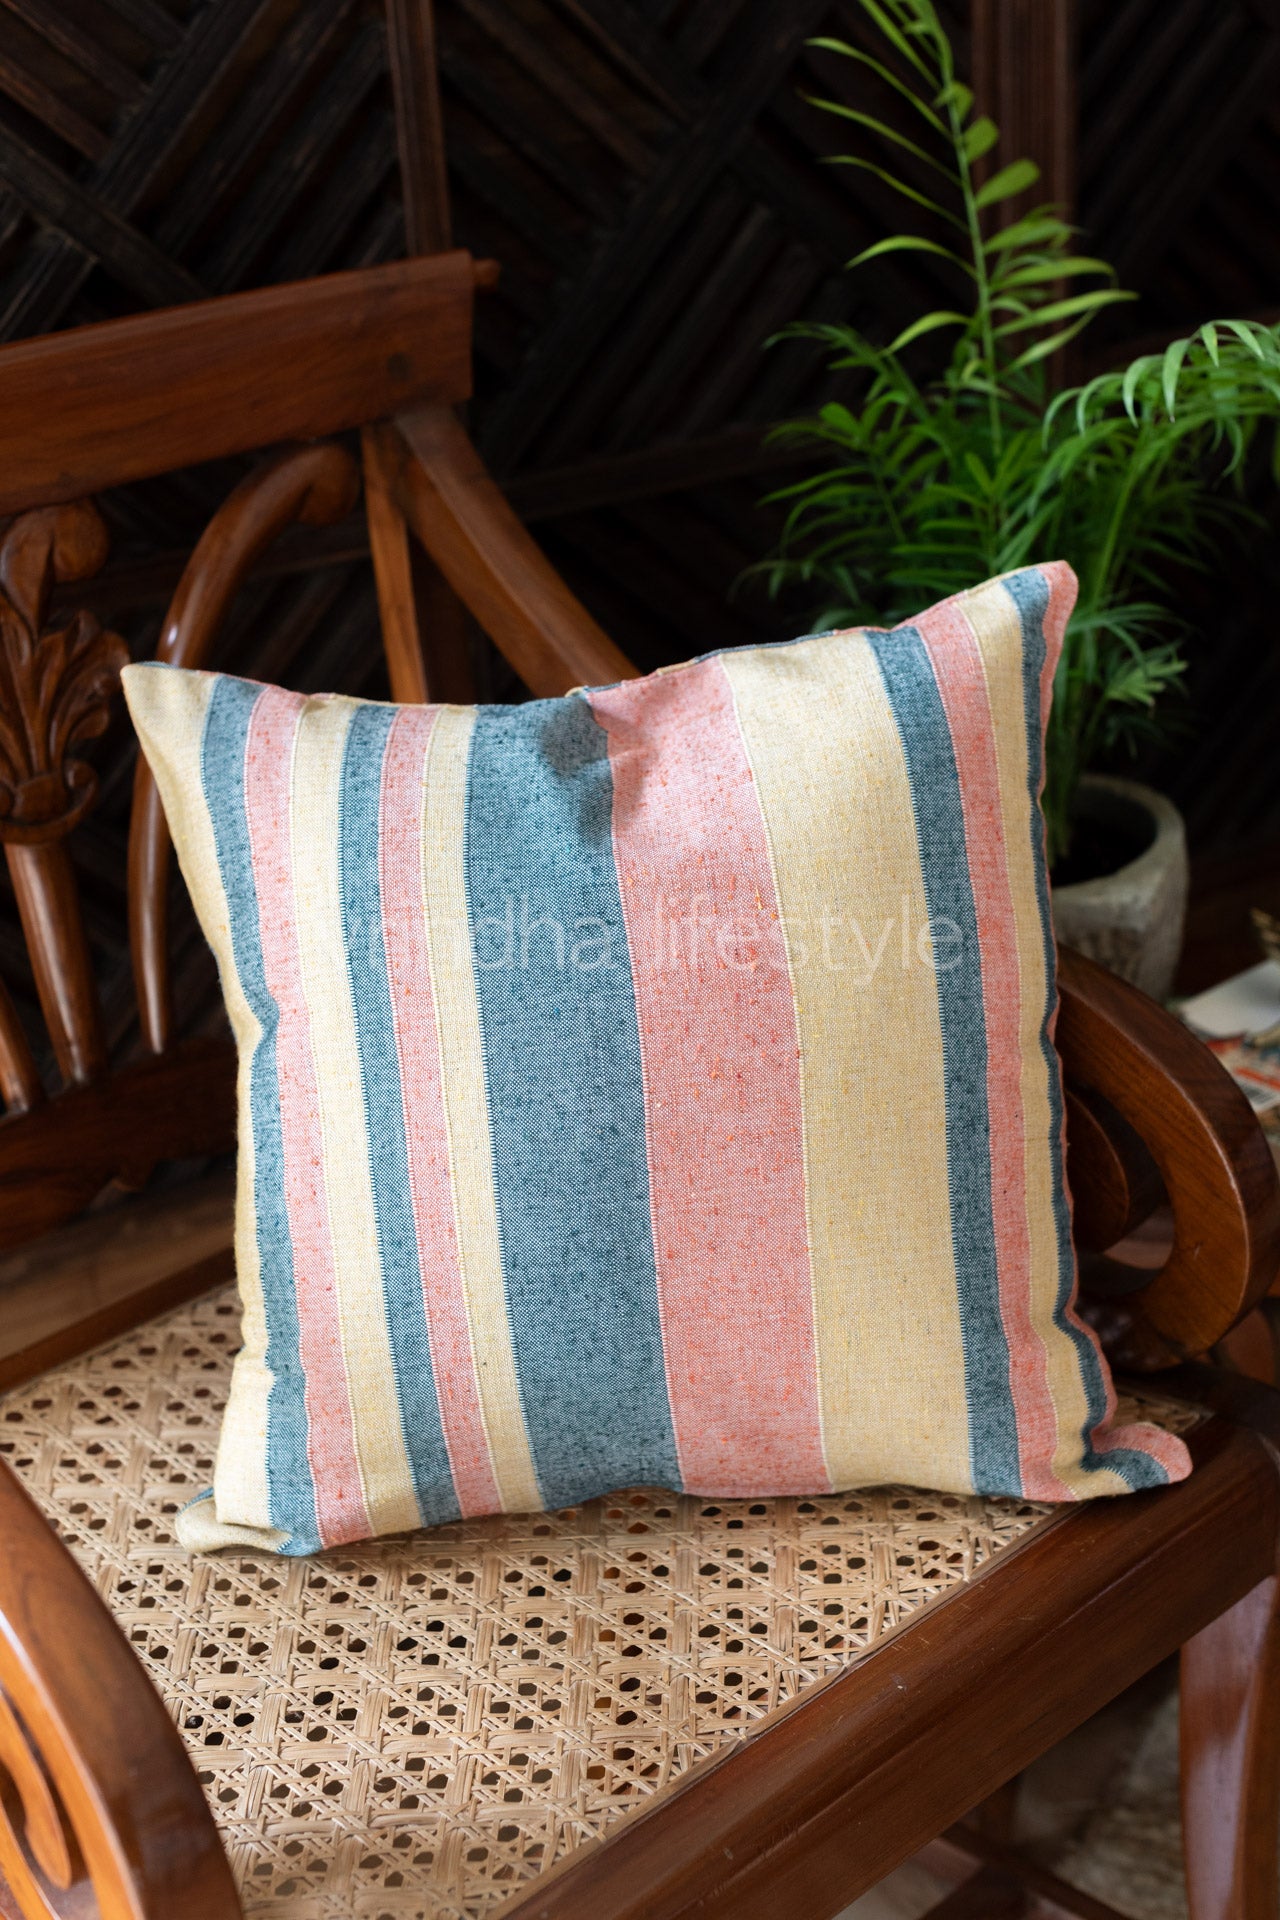 WOVEN STRIPES CUSHION COVERS-Set of two cushion covers